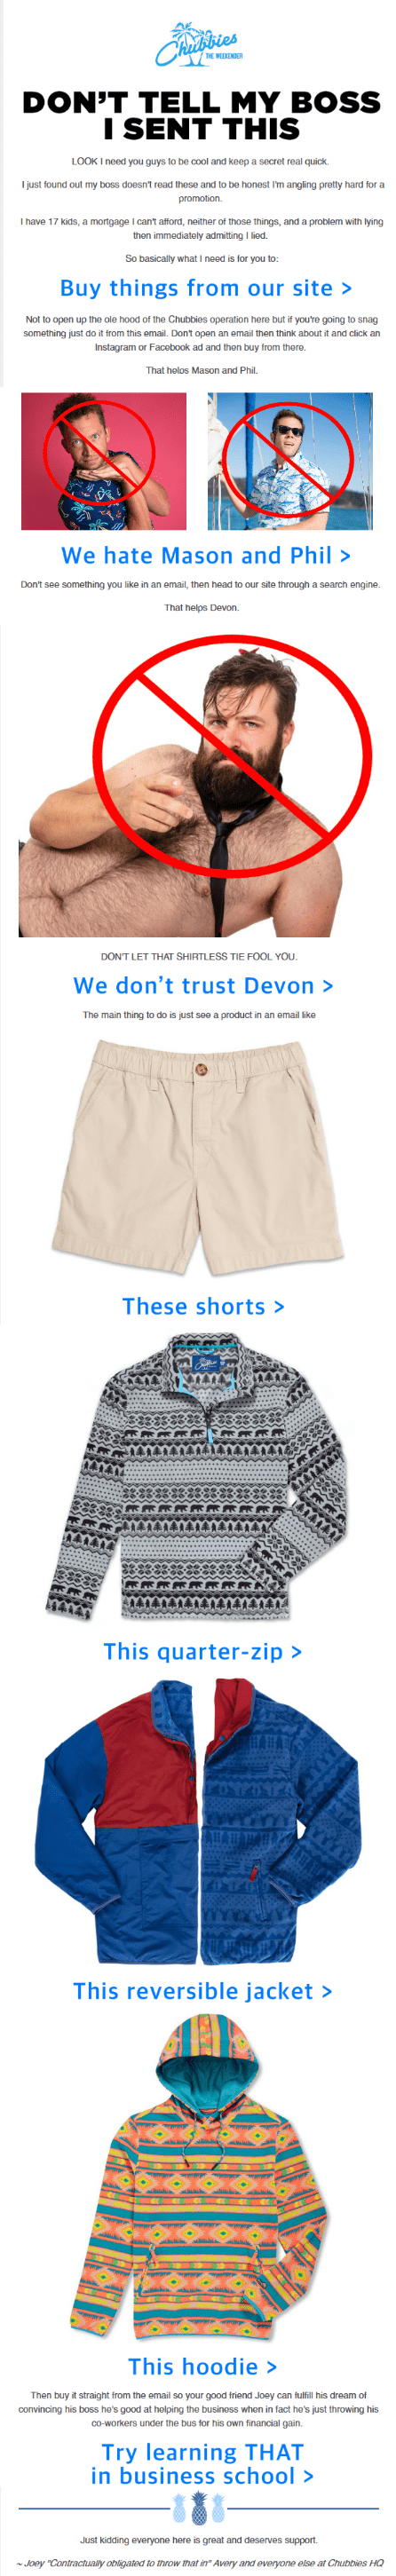 Email newsletter example _ Chubbies